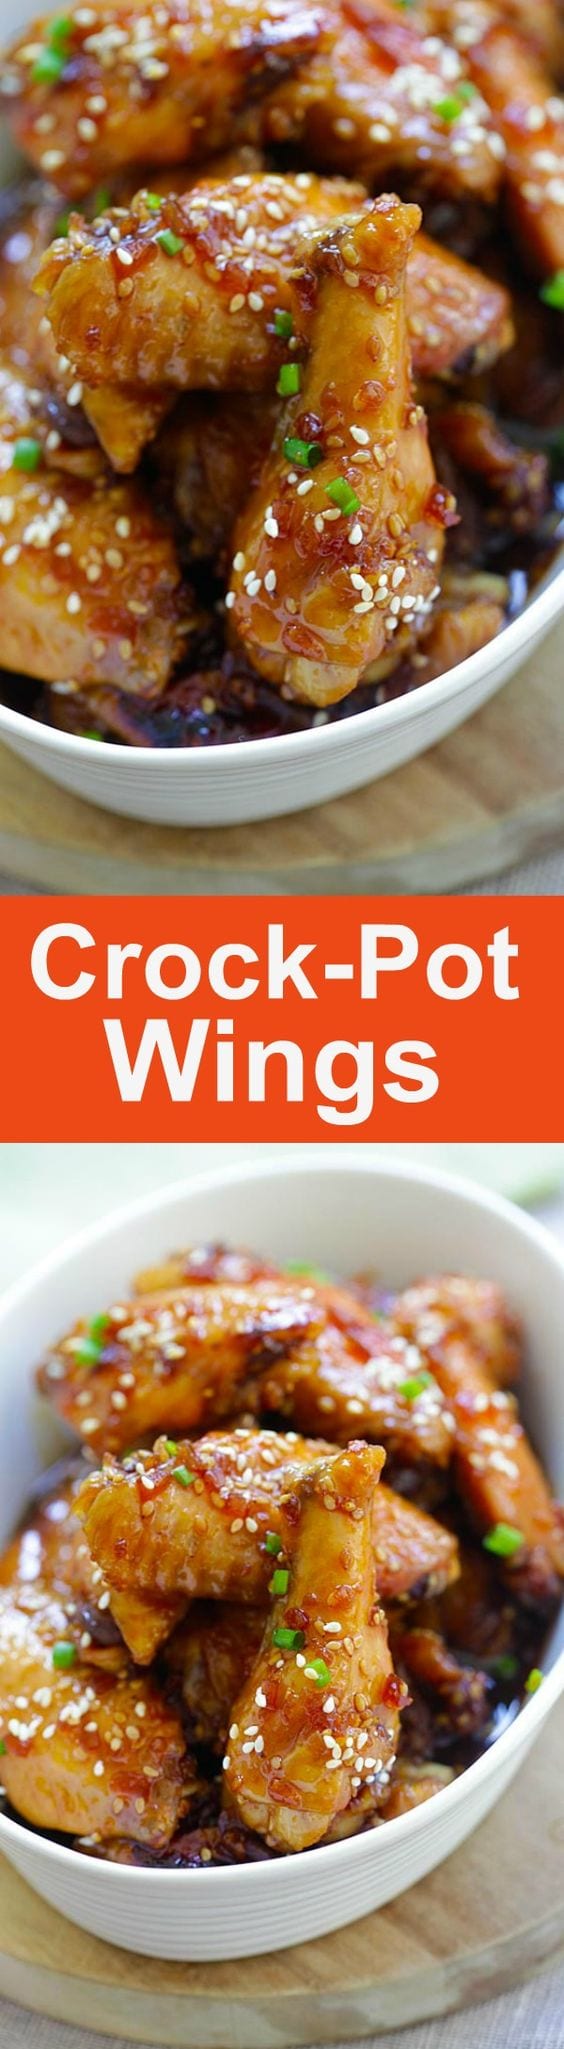 Crock-Pot Wings – sweet, savory and garlicky chicken wings cooked in a slow cooker with island teriyaki sauce. 10 mins prep time, so easy | rasamalaysia.com